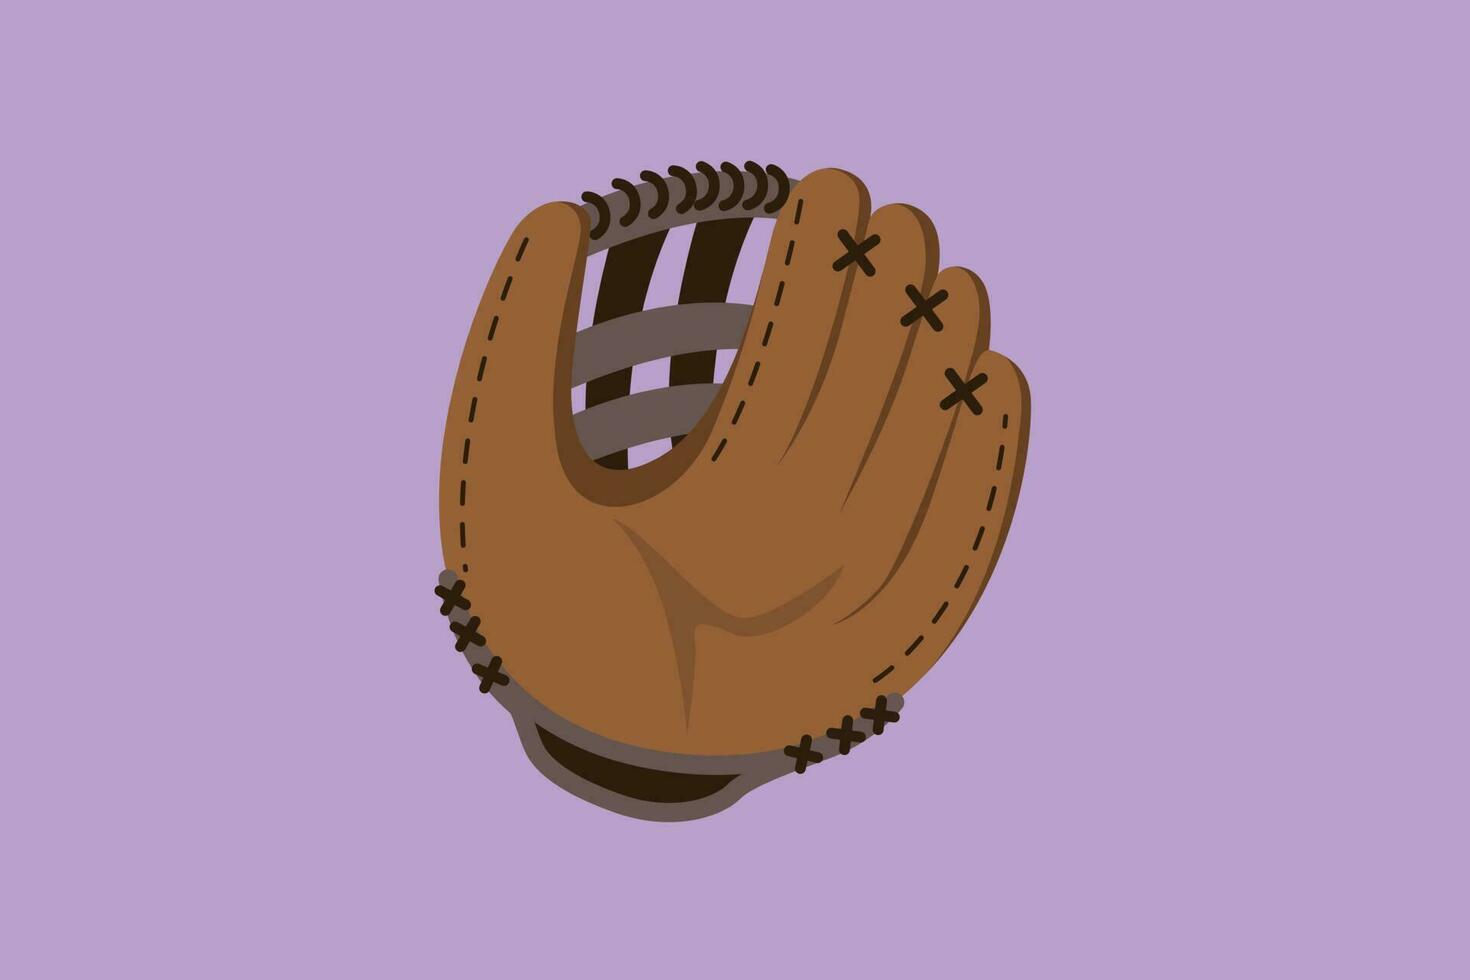 Cartoon flat style drawing baseball leather glove for championship promotion. Baseball tournament. Team sport league banner, logotype, label, icon, sticker, symbol. Graphic design vector illustration